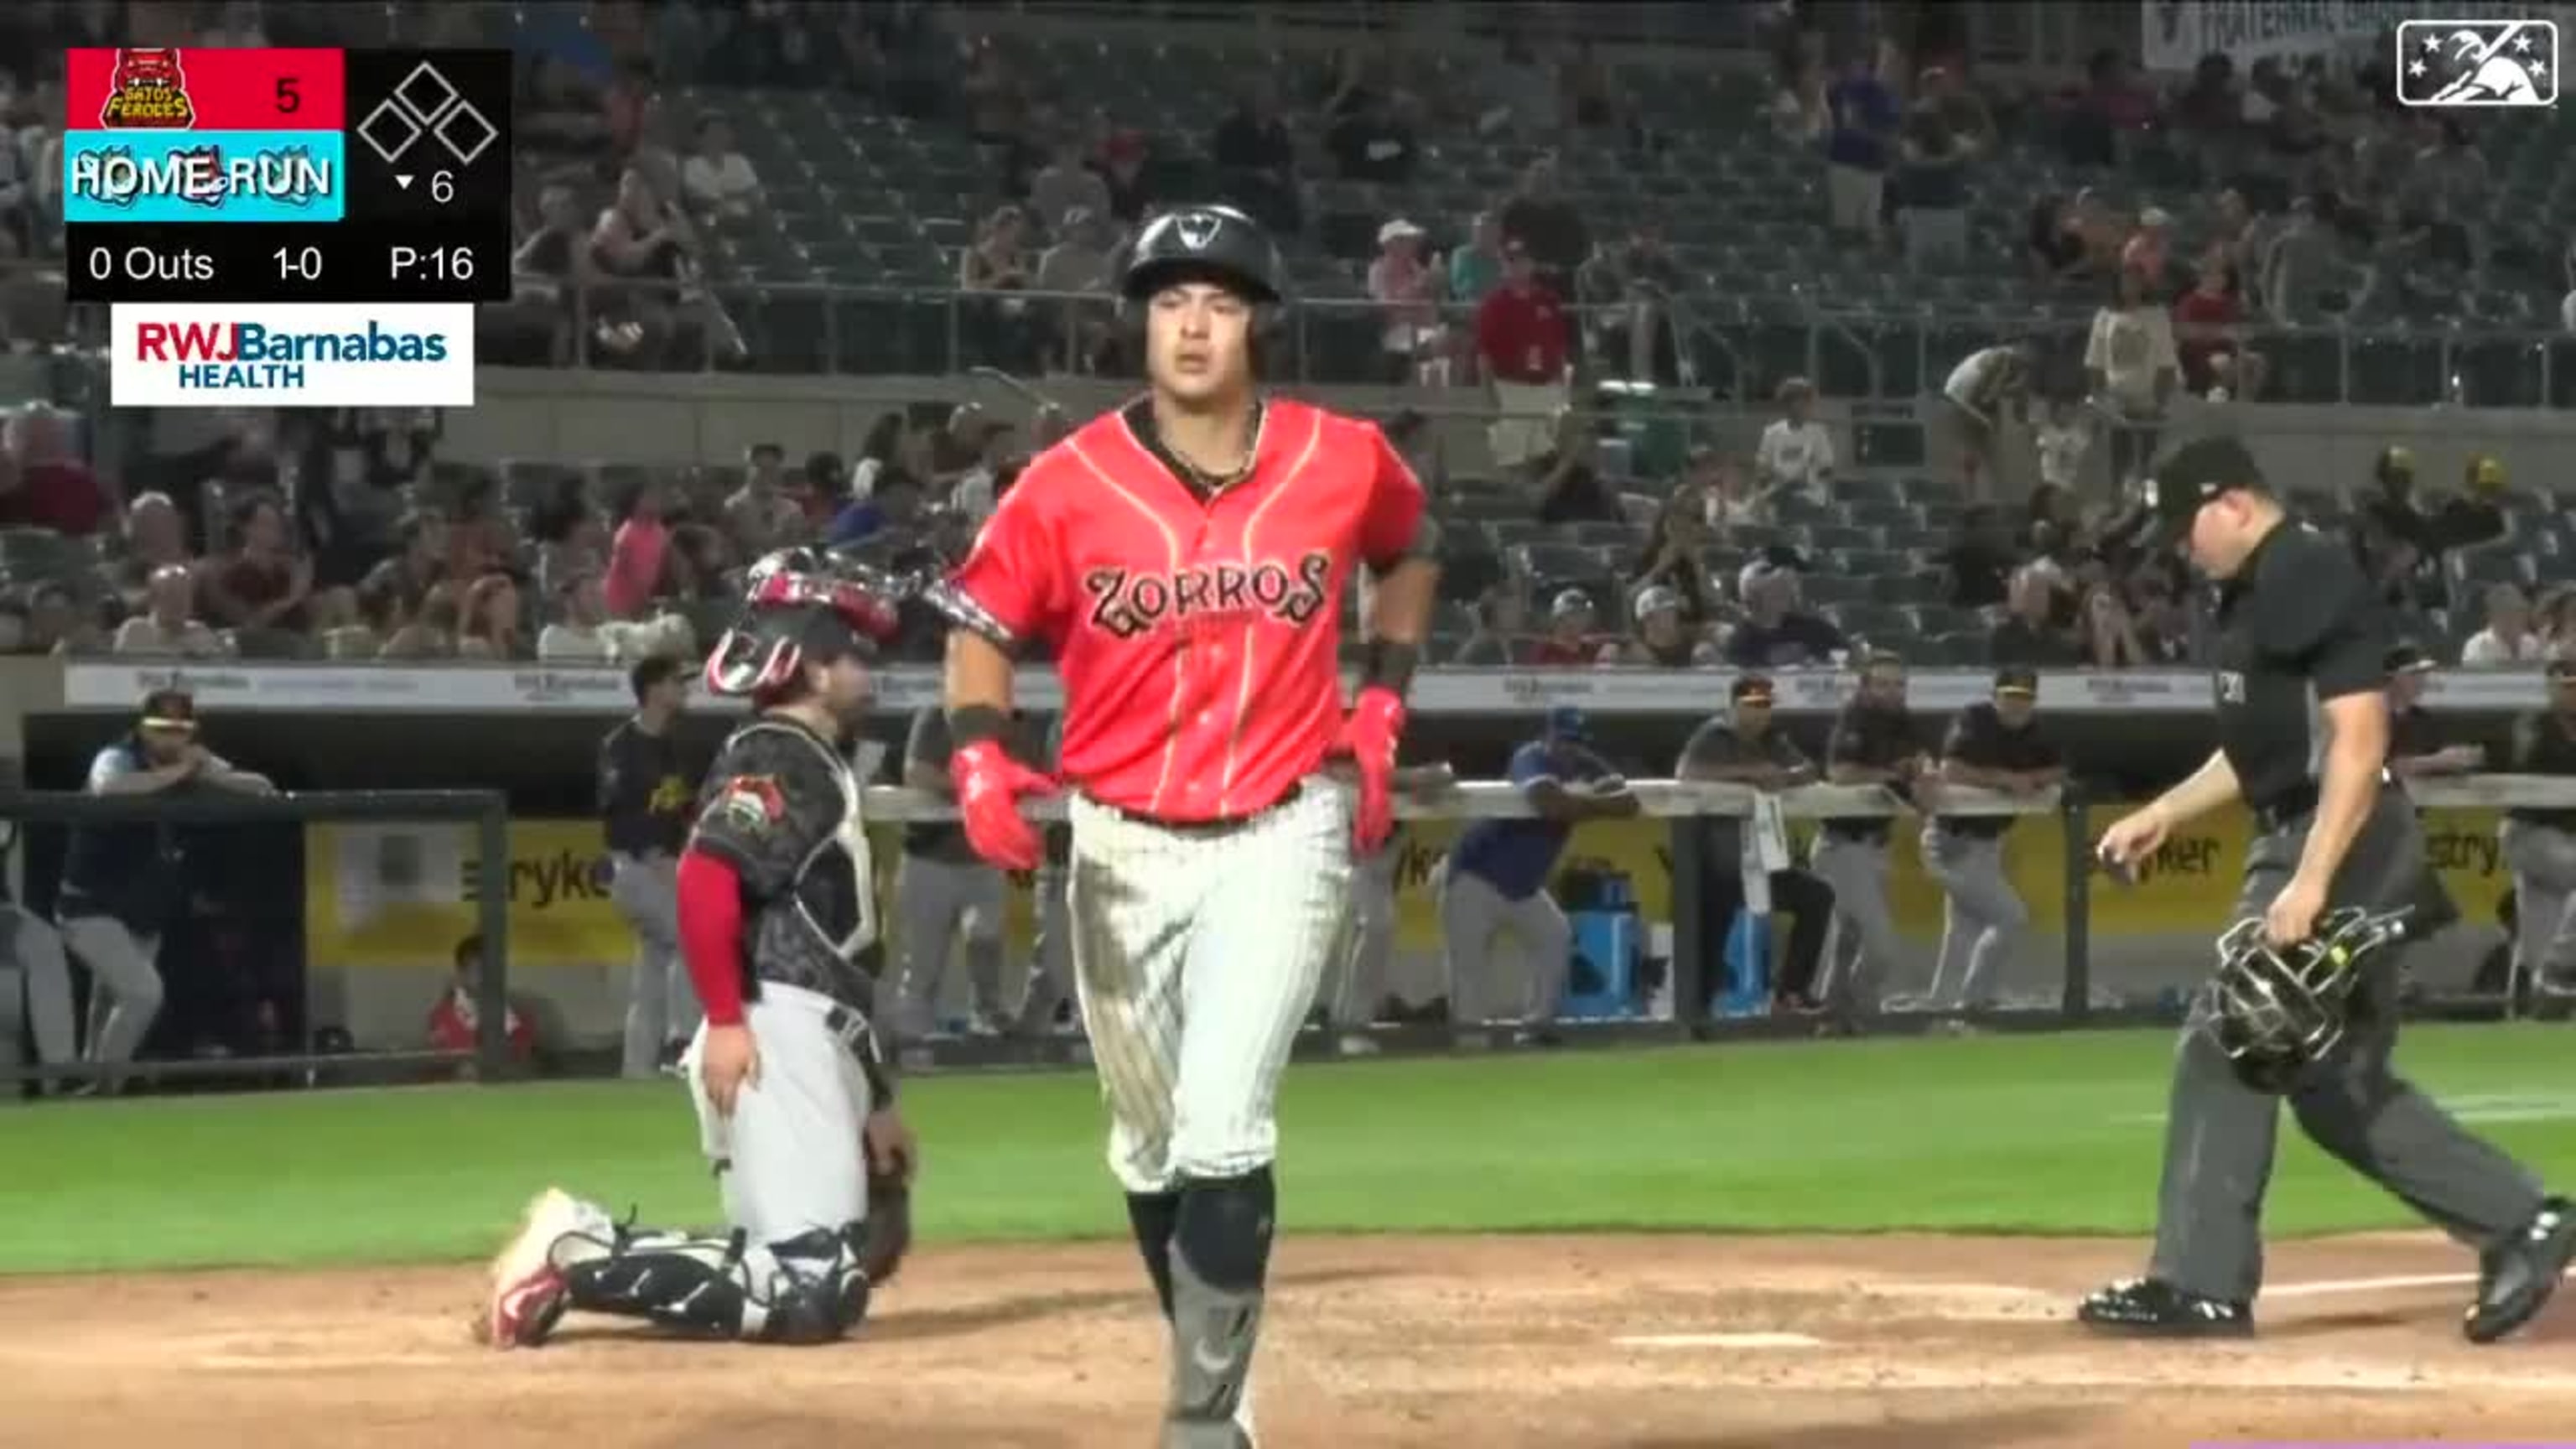 Highlights: Cleveland Indians 6-0 Chicago White Sox in MLB